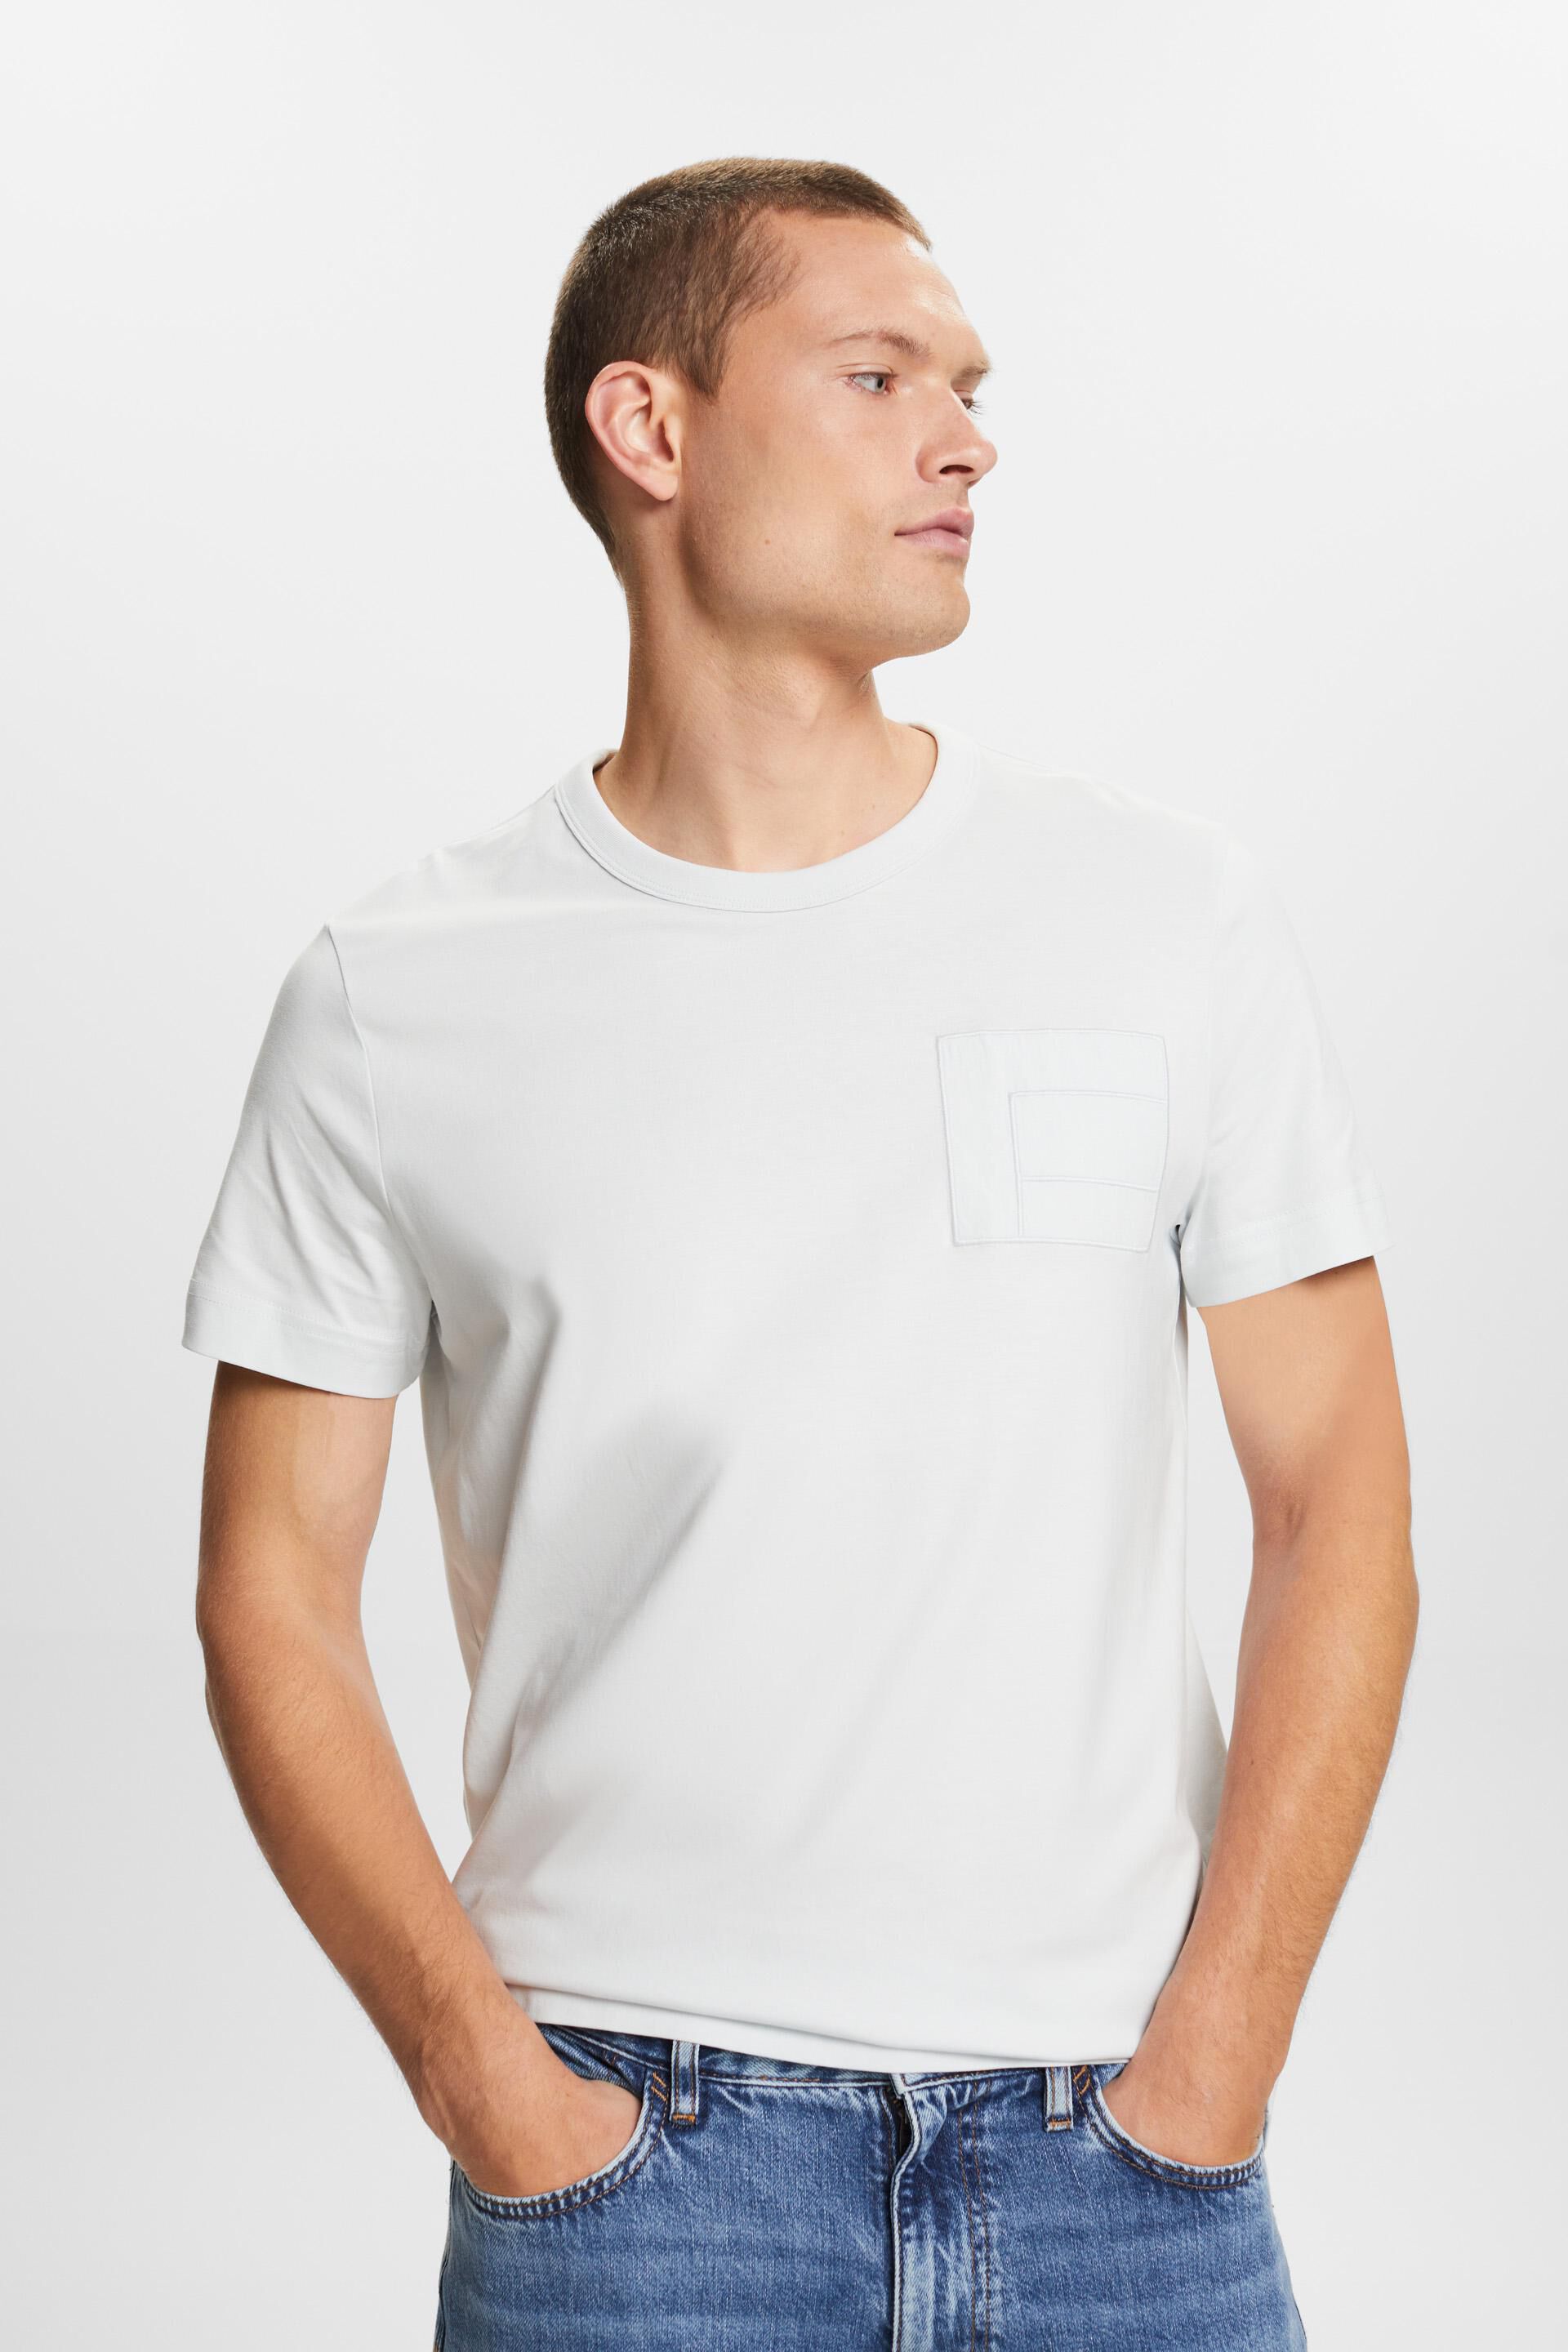 Esprit Jersey t-shirt with cotton 100% embroidery,